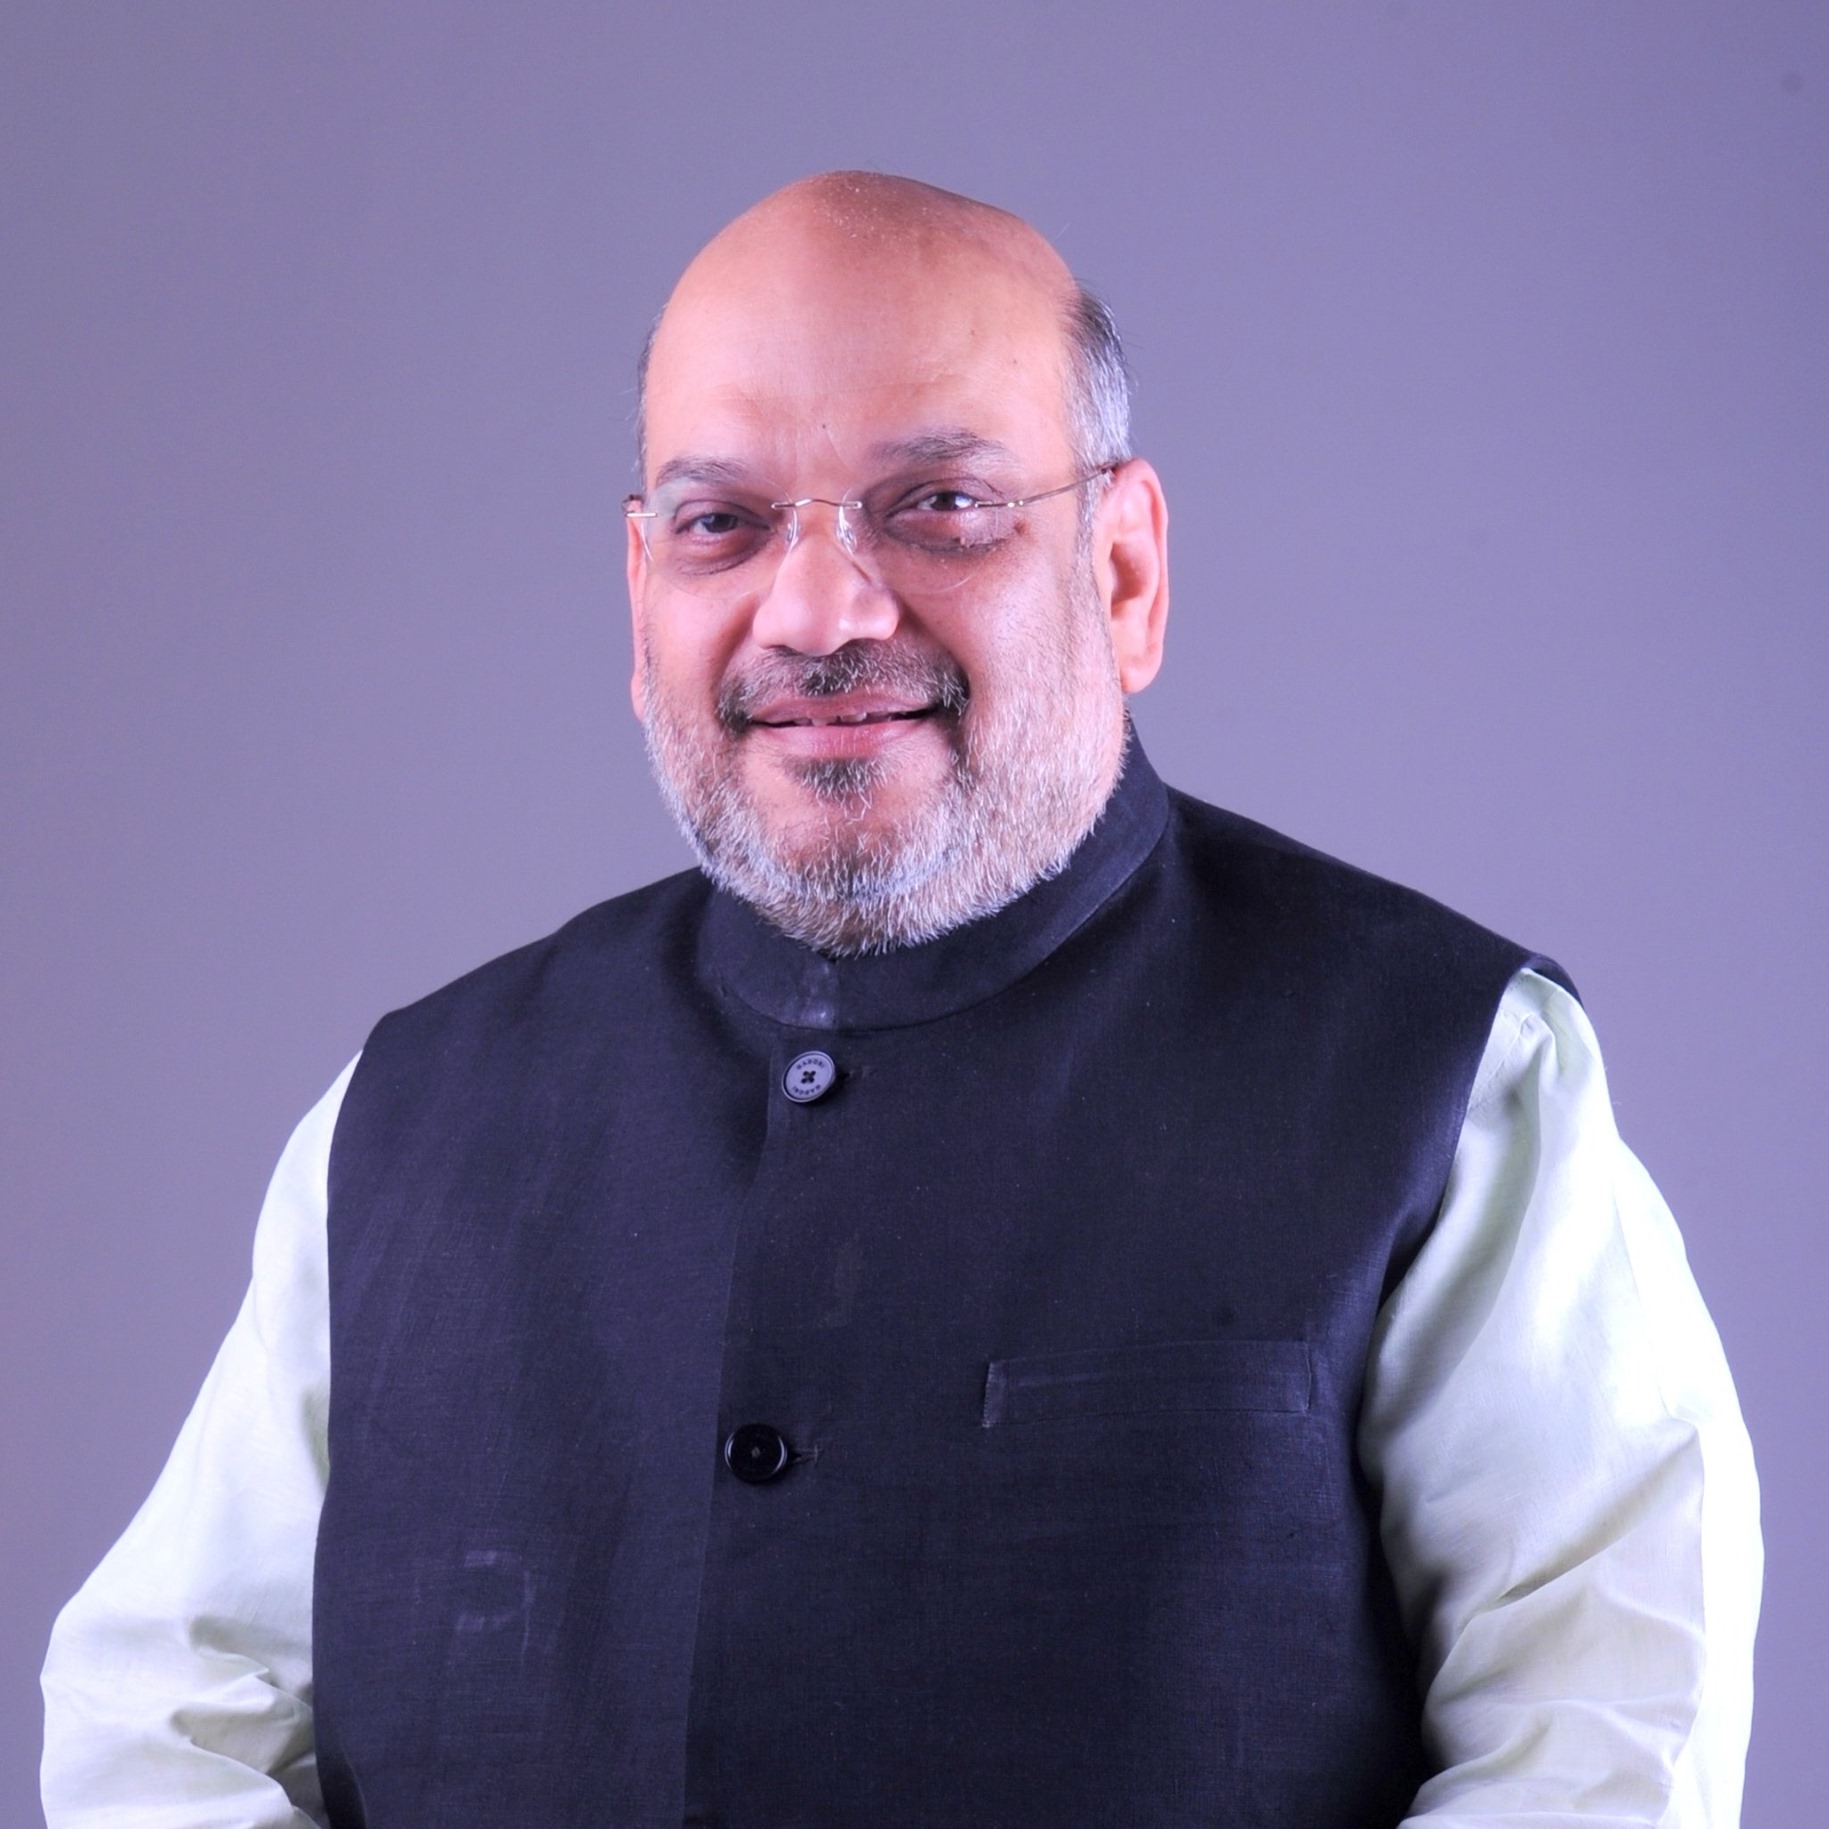 Union Home Minister Amit Shah Welcomed Modi Government’s Decision to give Reservation for OBC Category